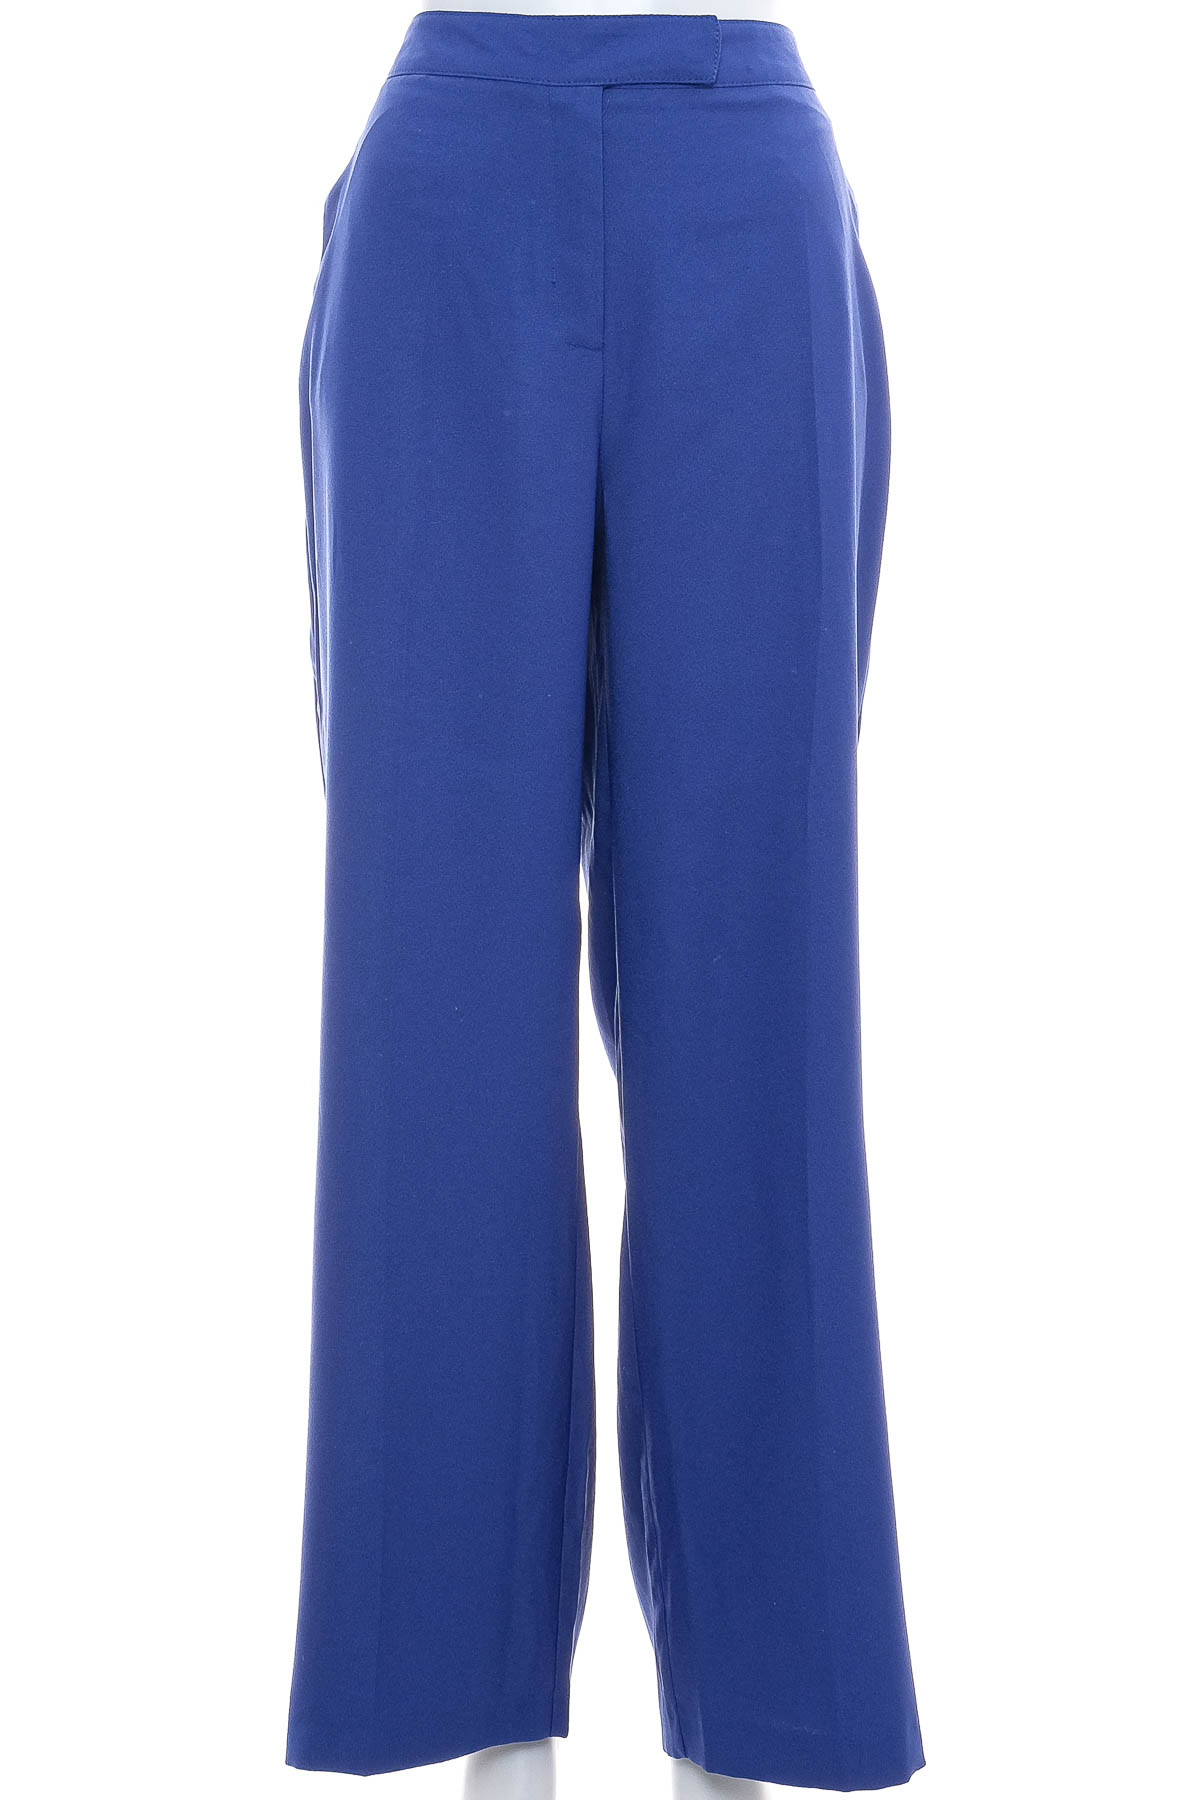 Women's trousers - TAILORED - 0